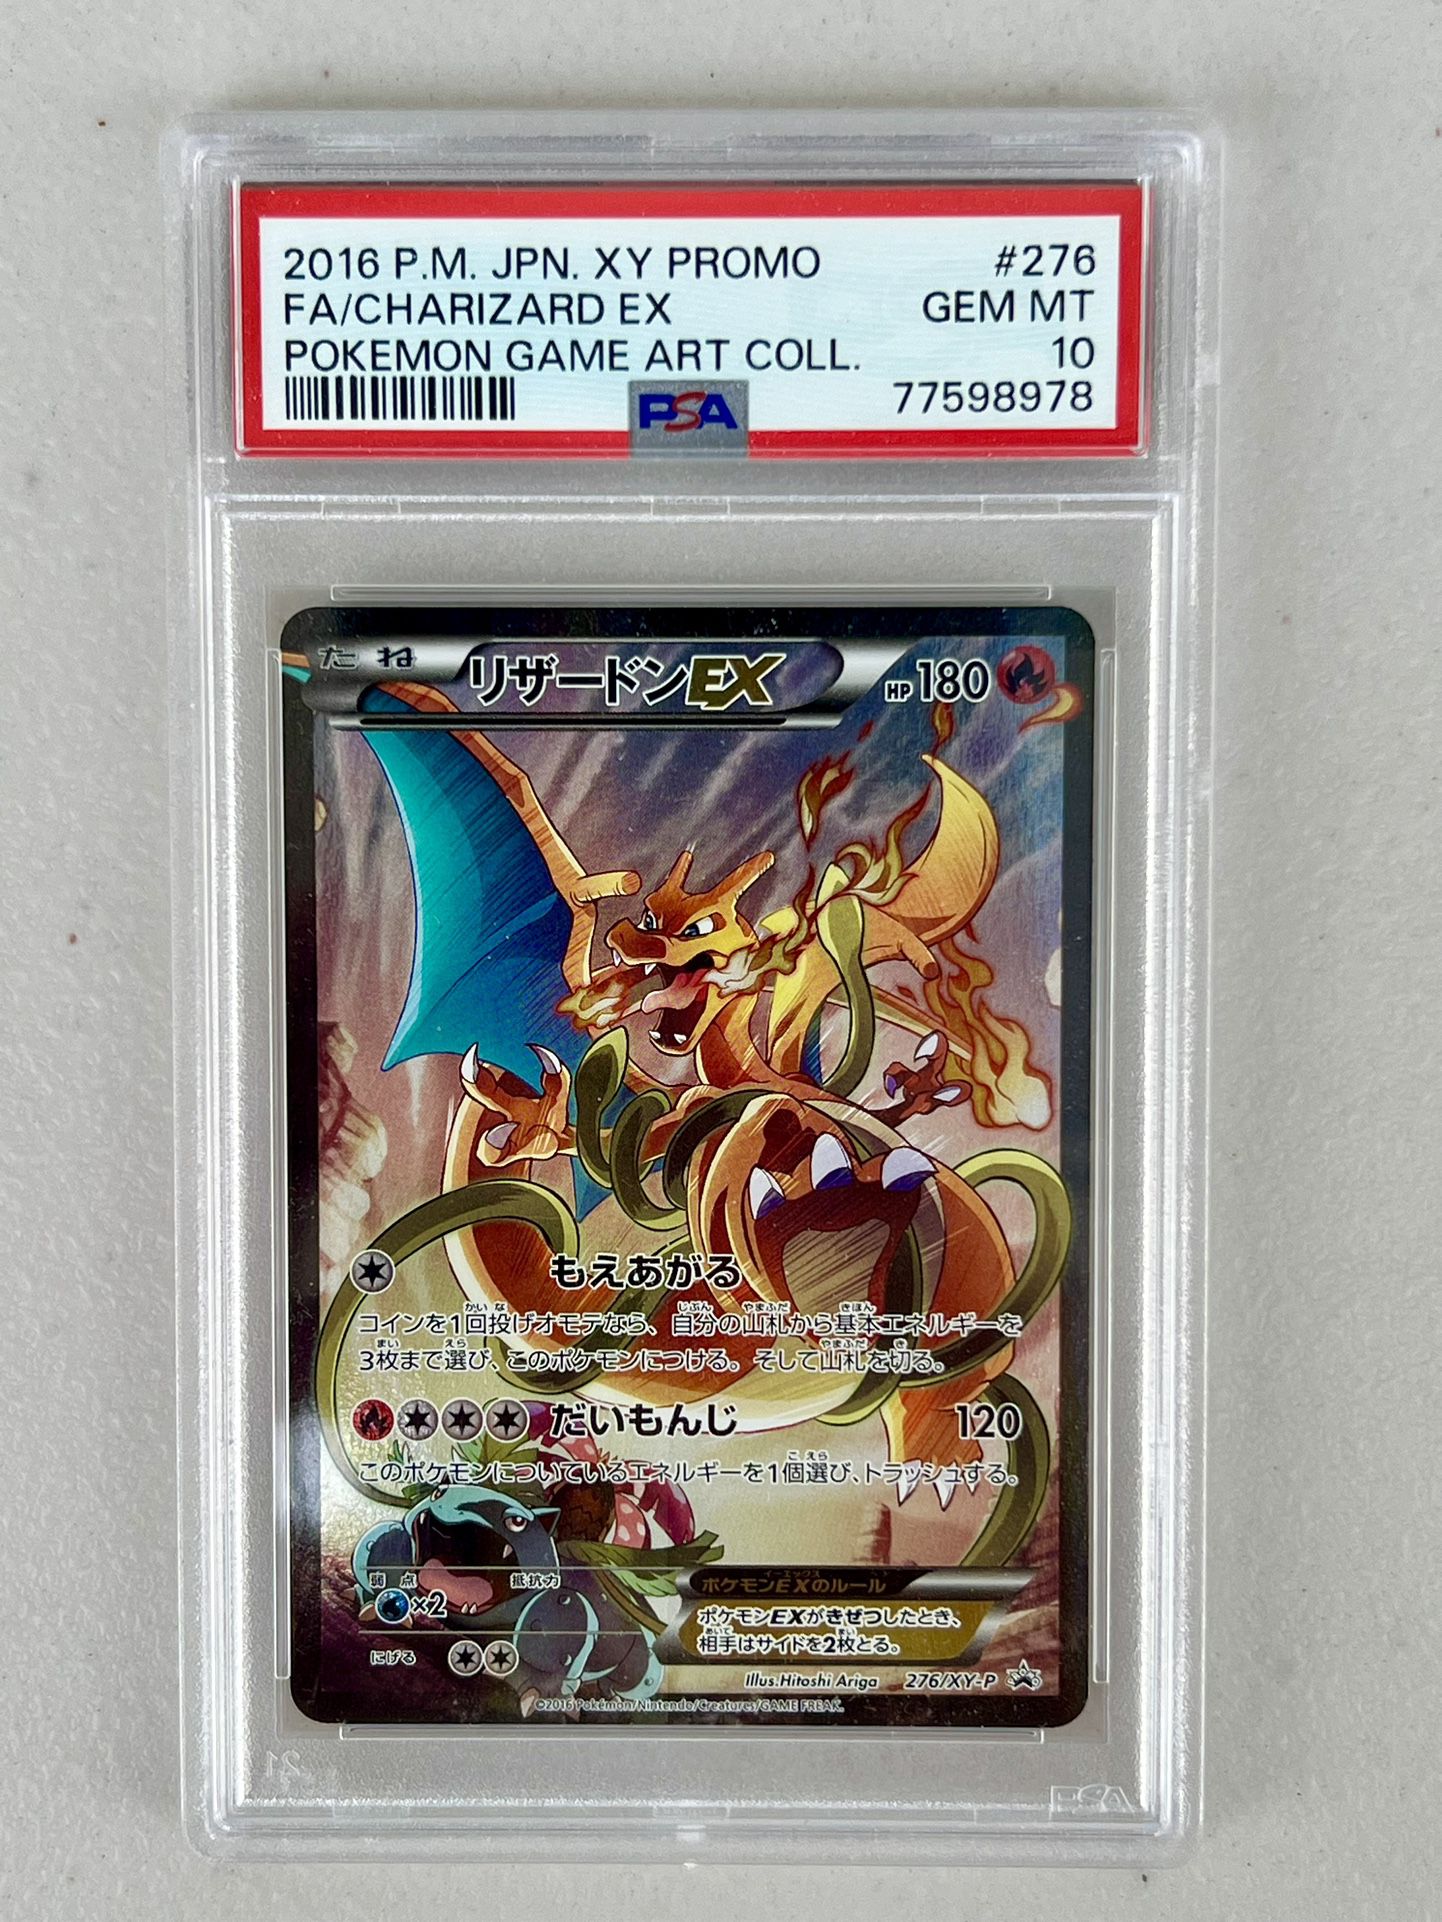 (NFS) Personal Collection..PSA 10 2016 Charizard EX 276/XY-P